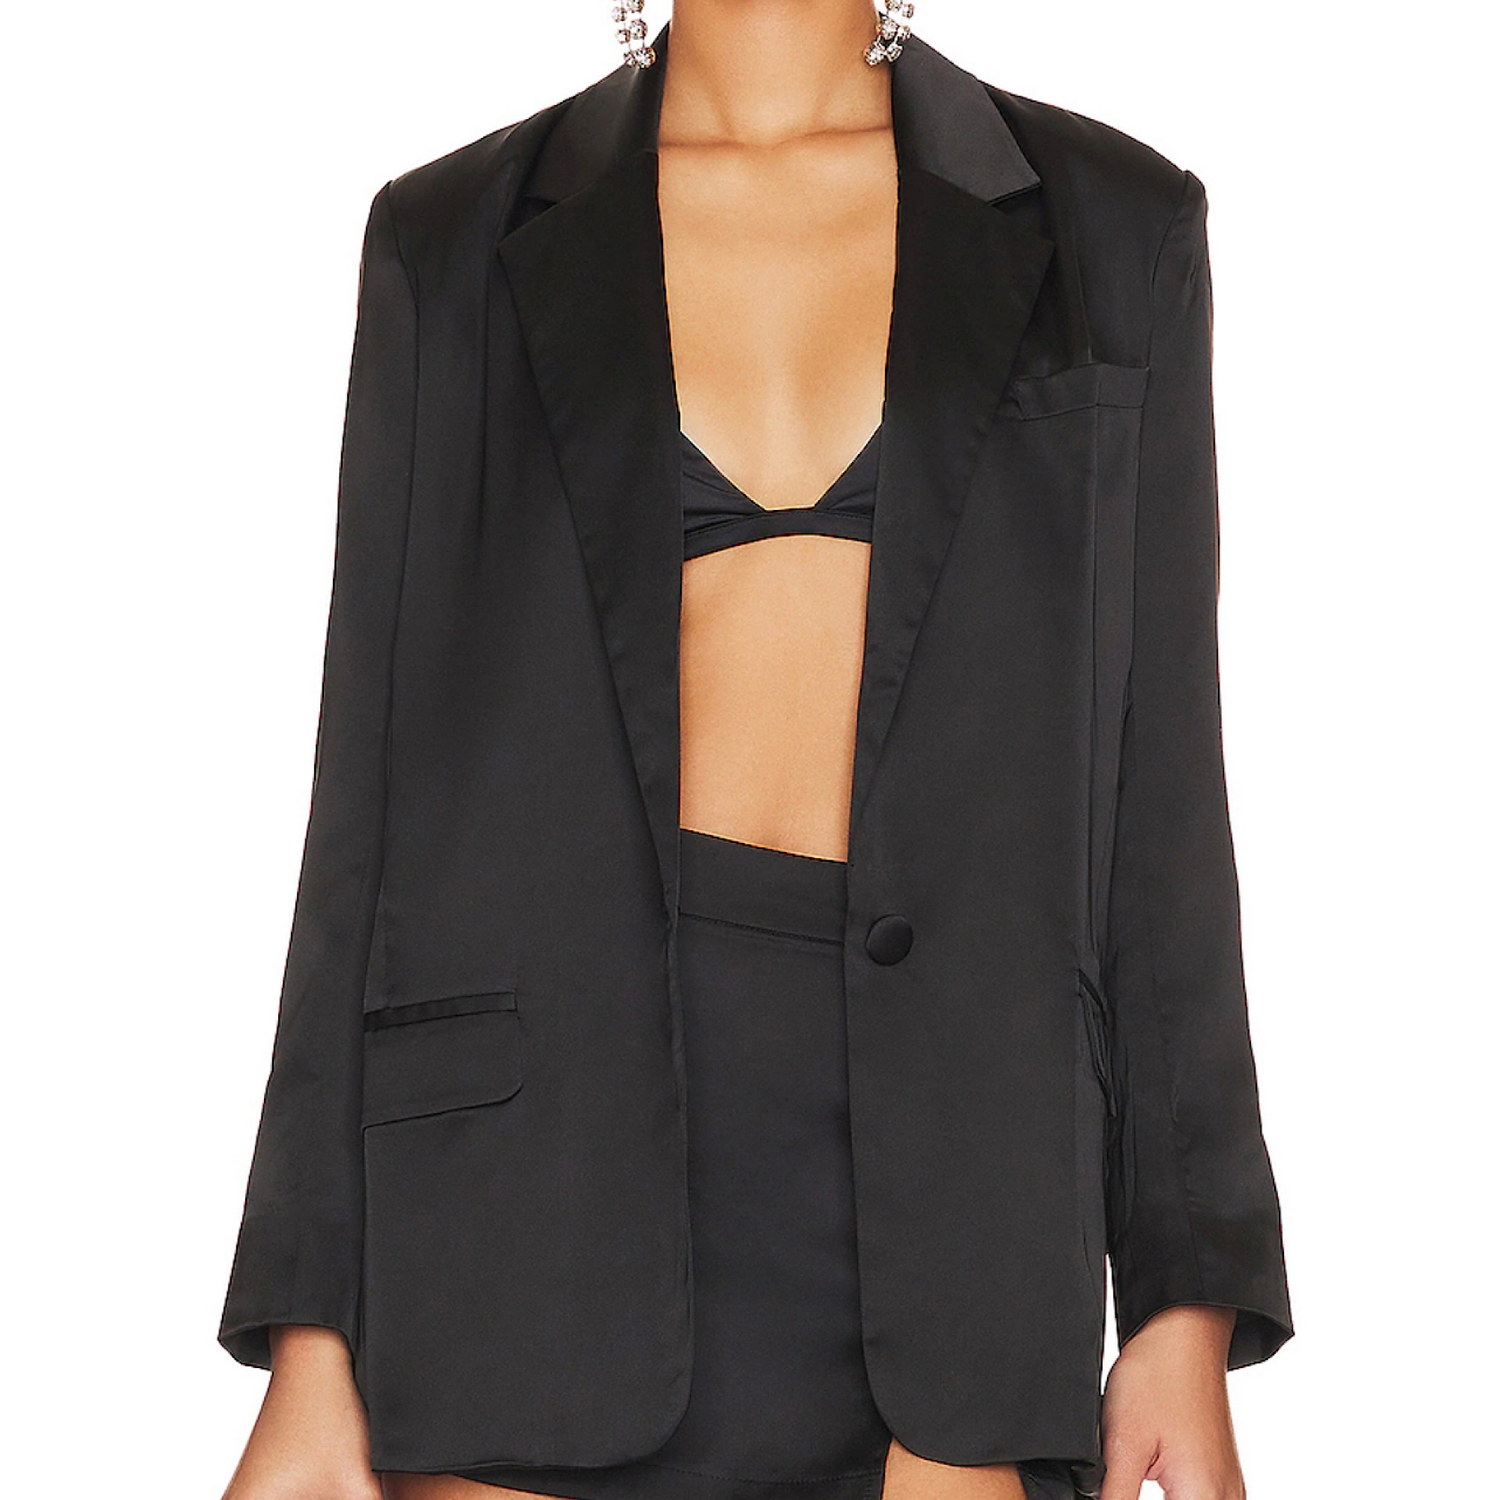 This satin blazer is designed with a longer length and notched lapels for instant boss style.